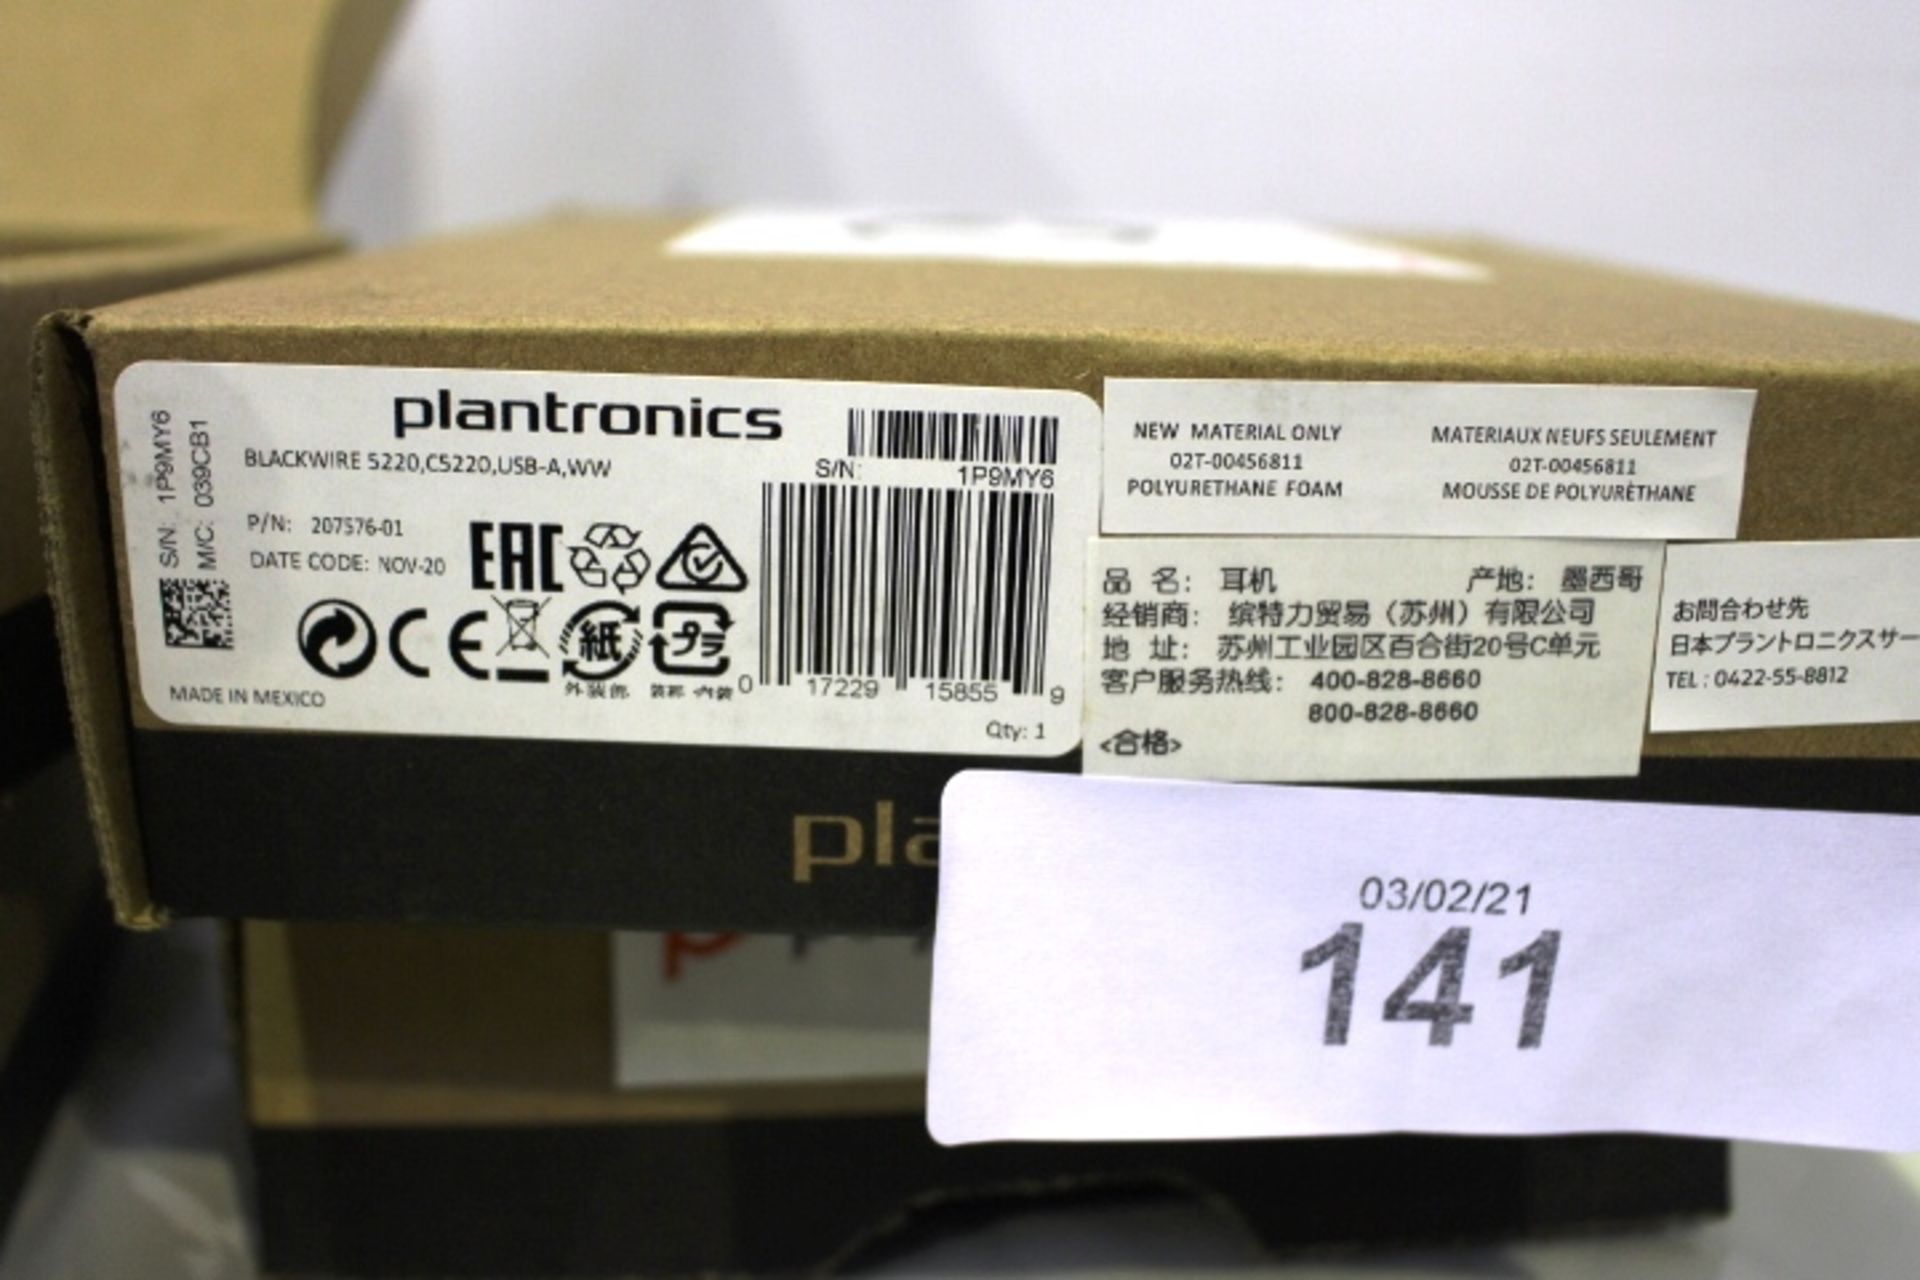 4 x Poly Blackwire C5220 office headphones, model 207576-01 - new in box (cab3) - Image 3 of 3